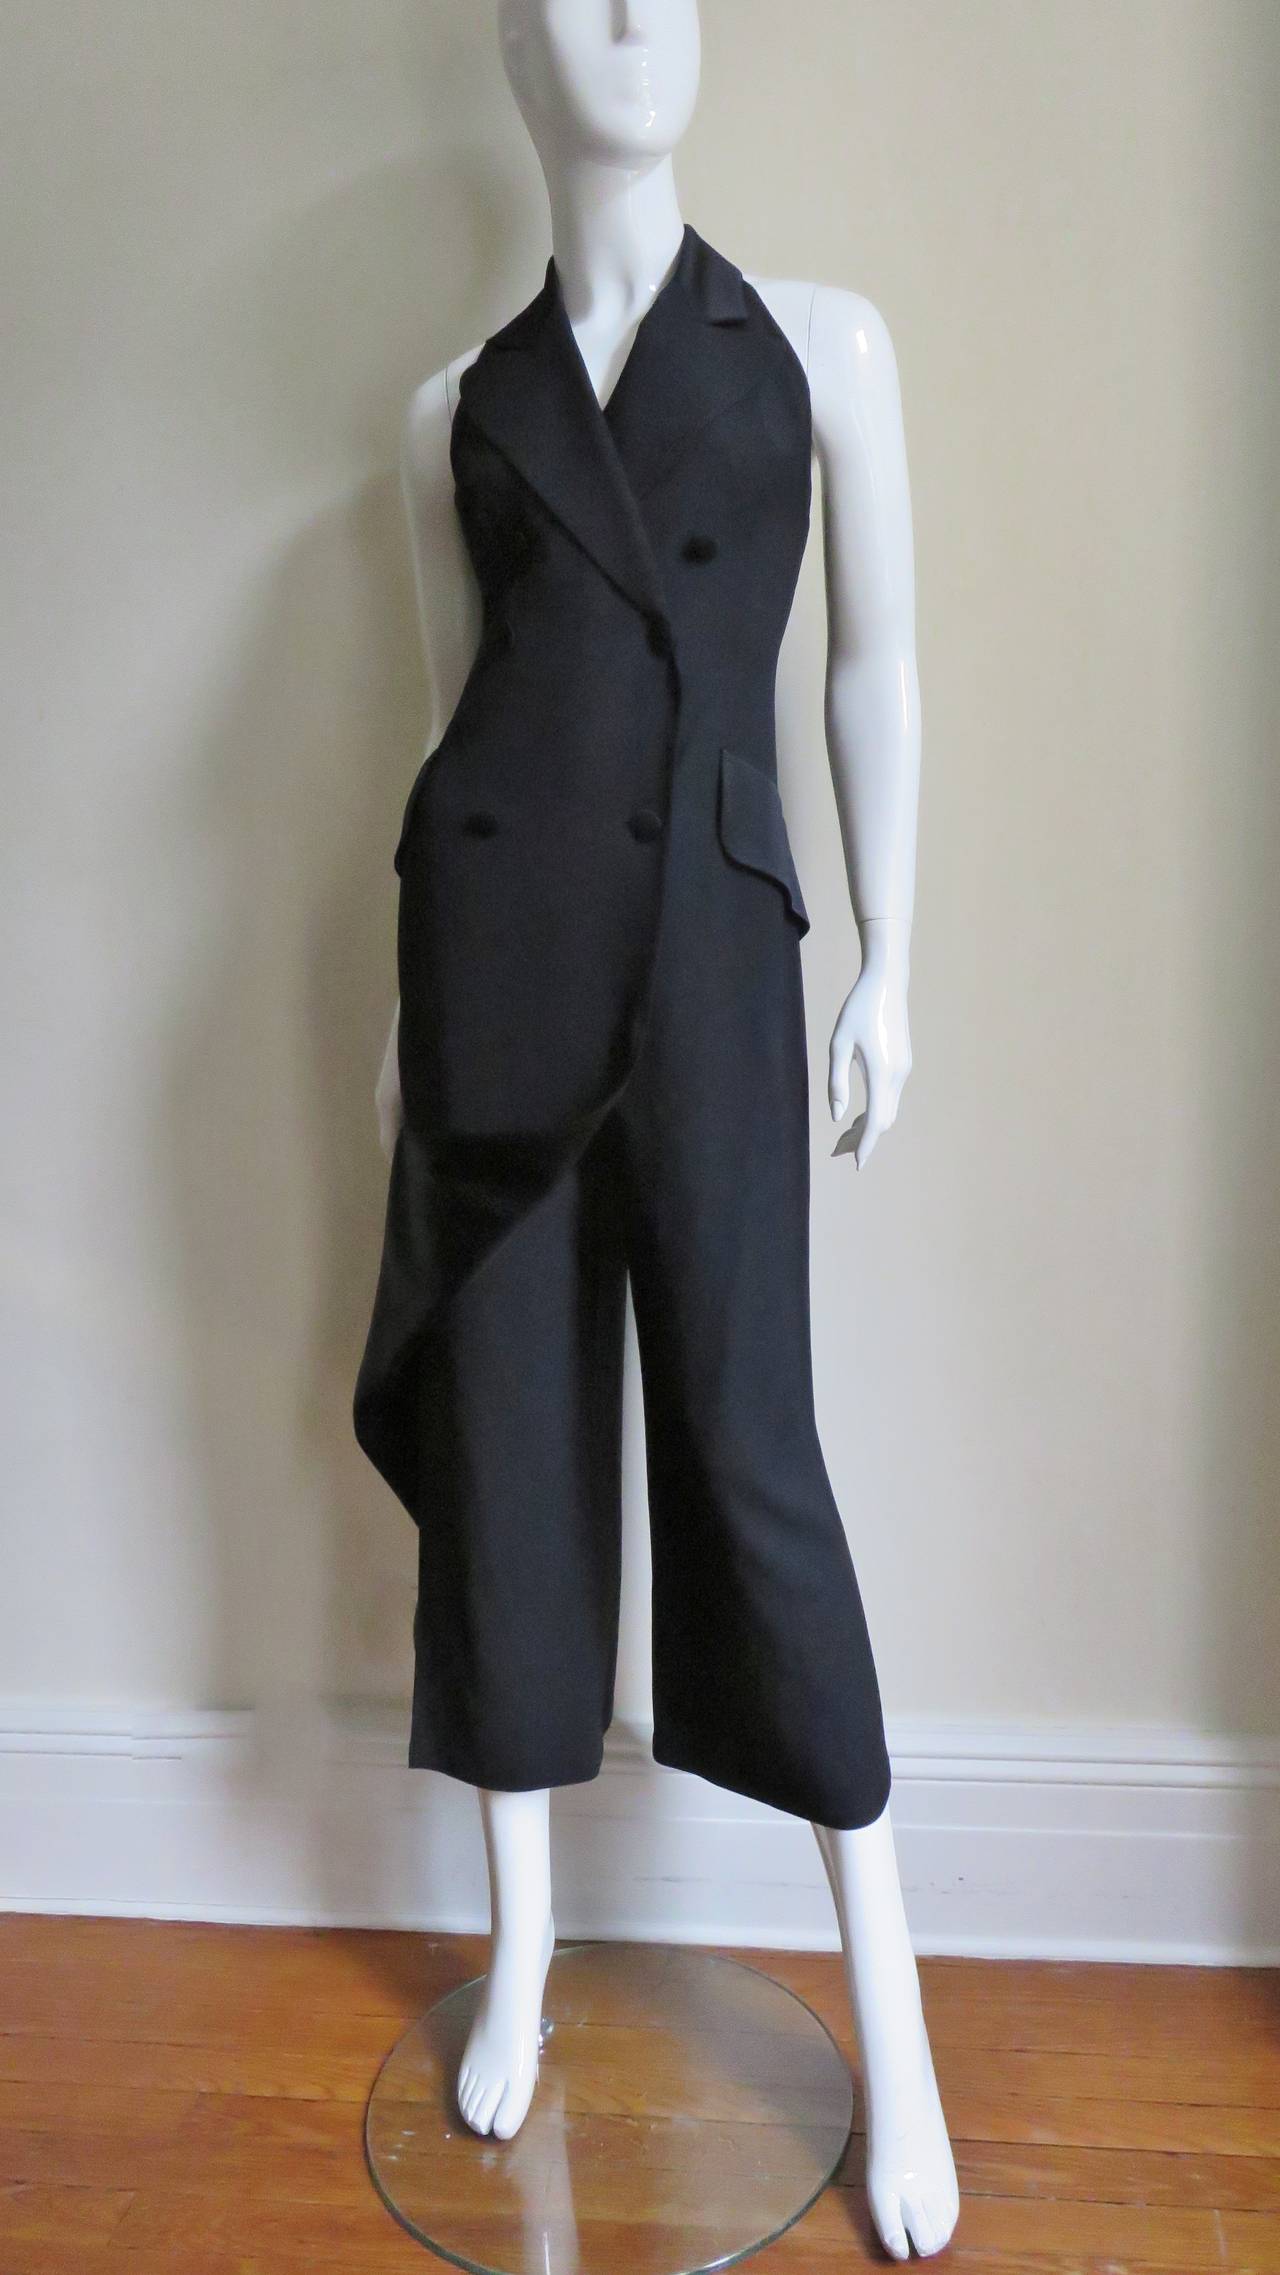 Moschino Halter Tuxedo Jumpsuit  In Good Condition For Sale In Water Mill, NY